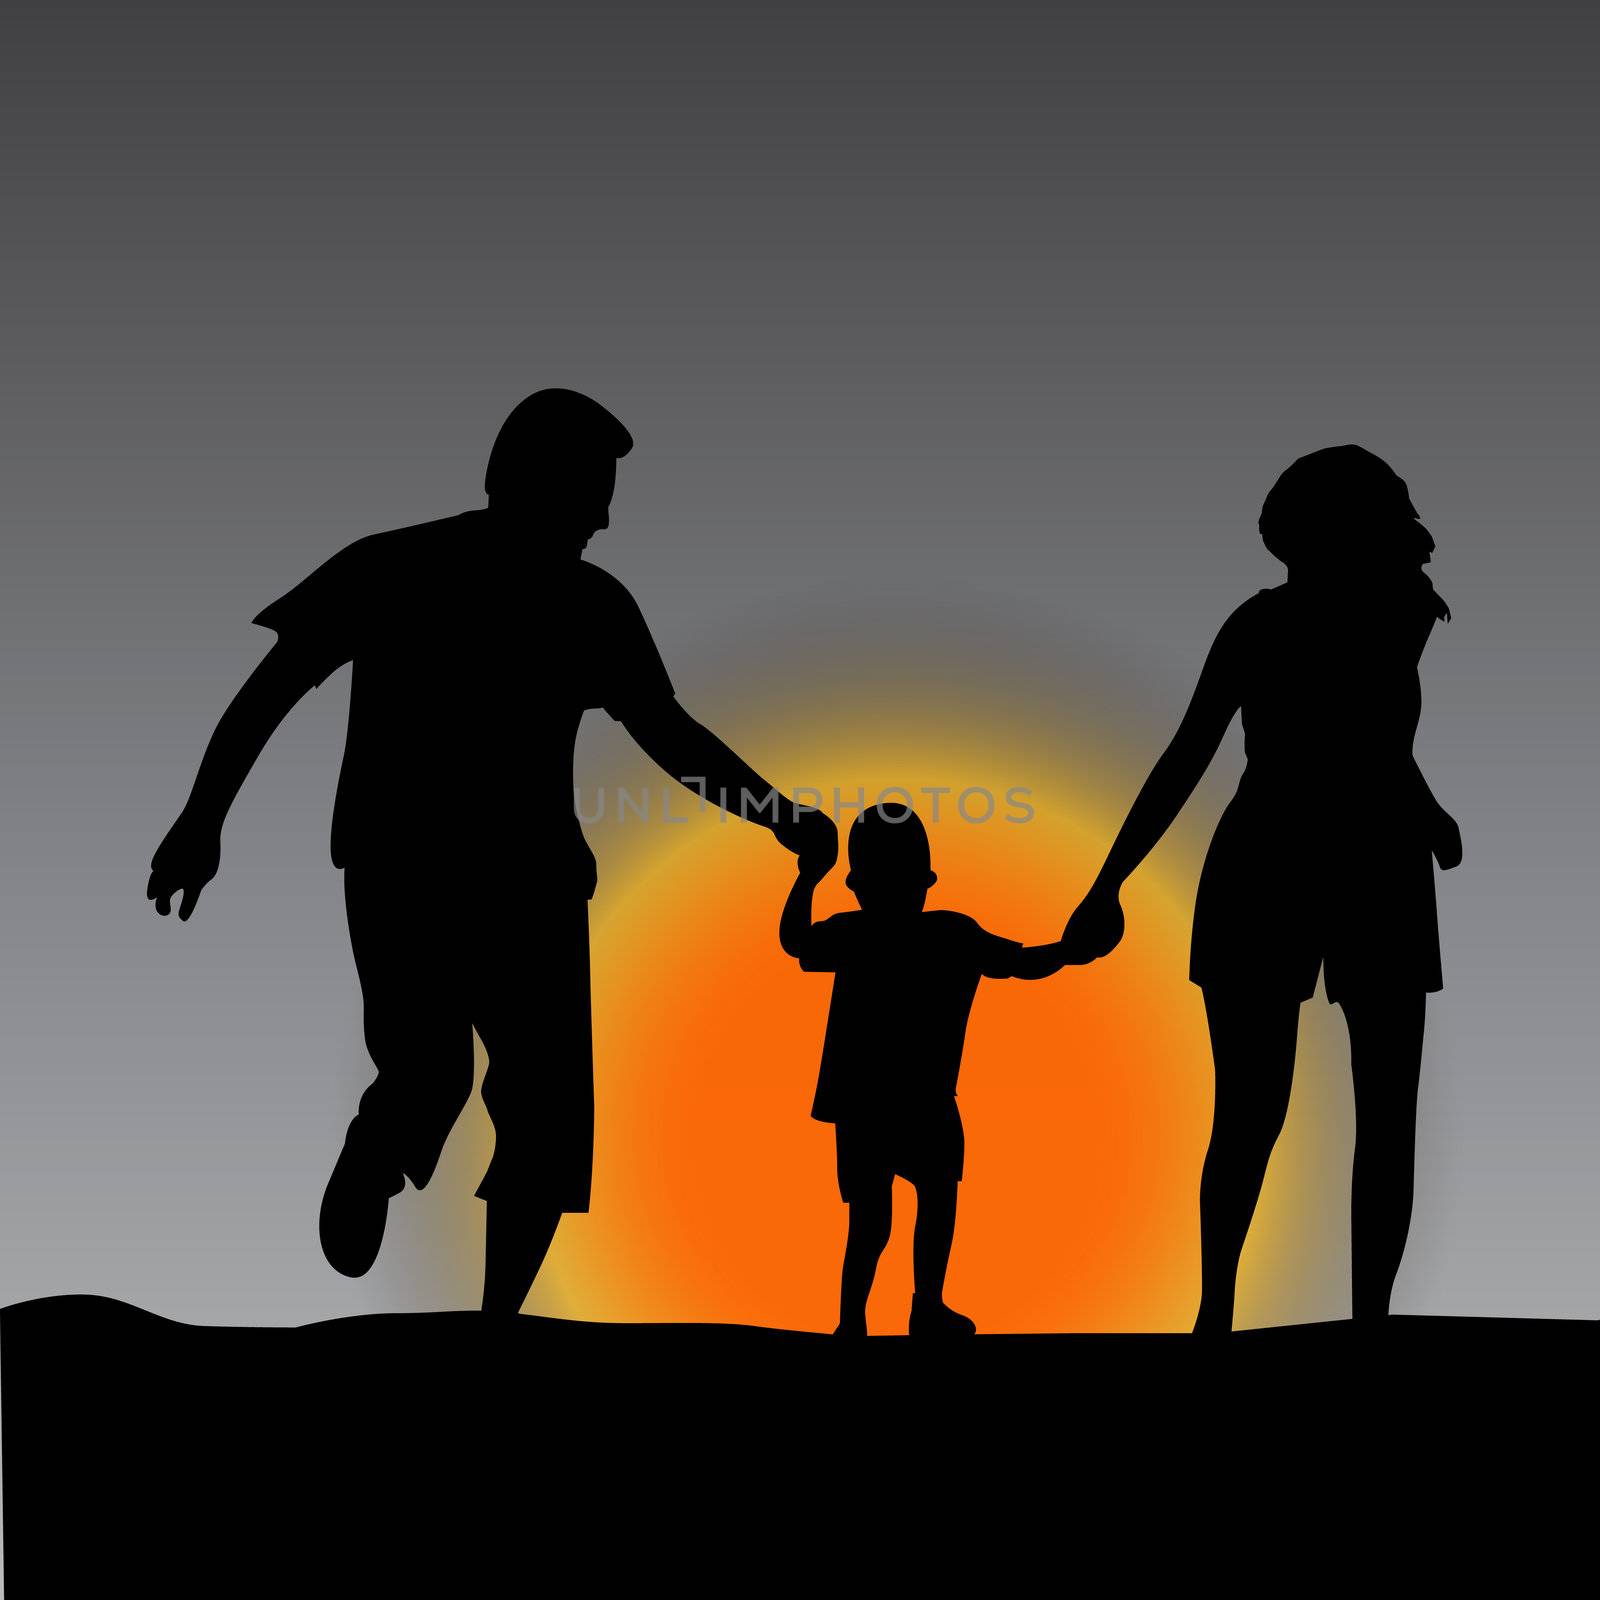 Eps format, prepared the mother, father and child silhouette